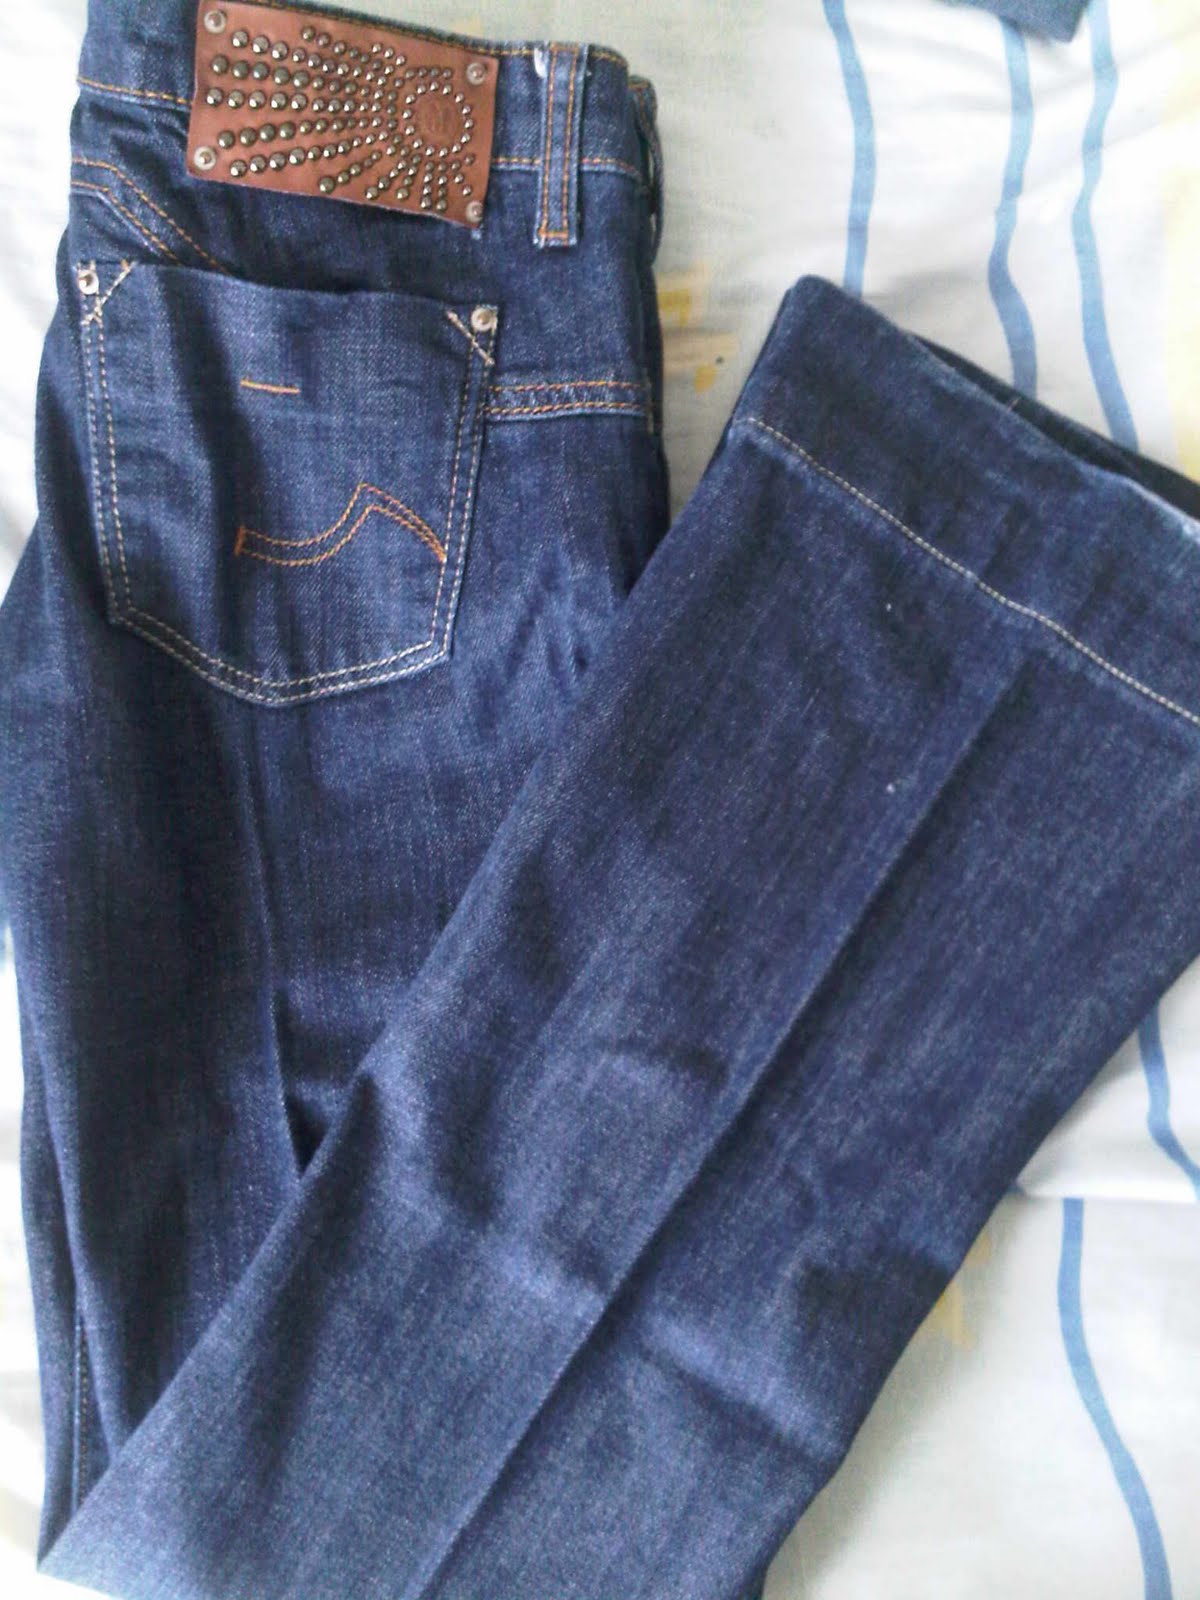 mng jeans